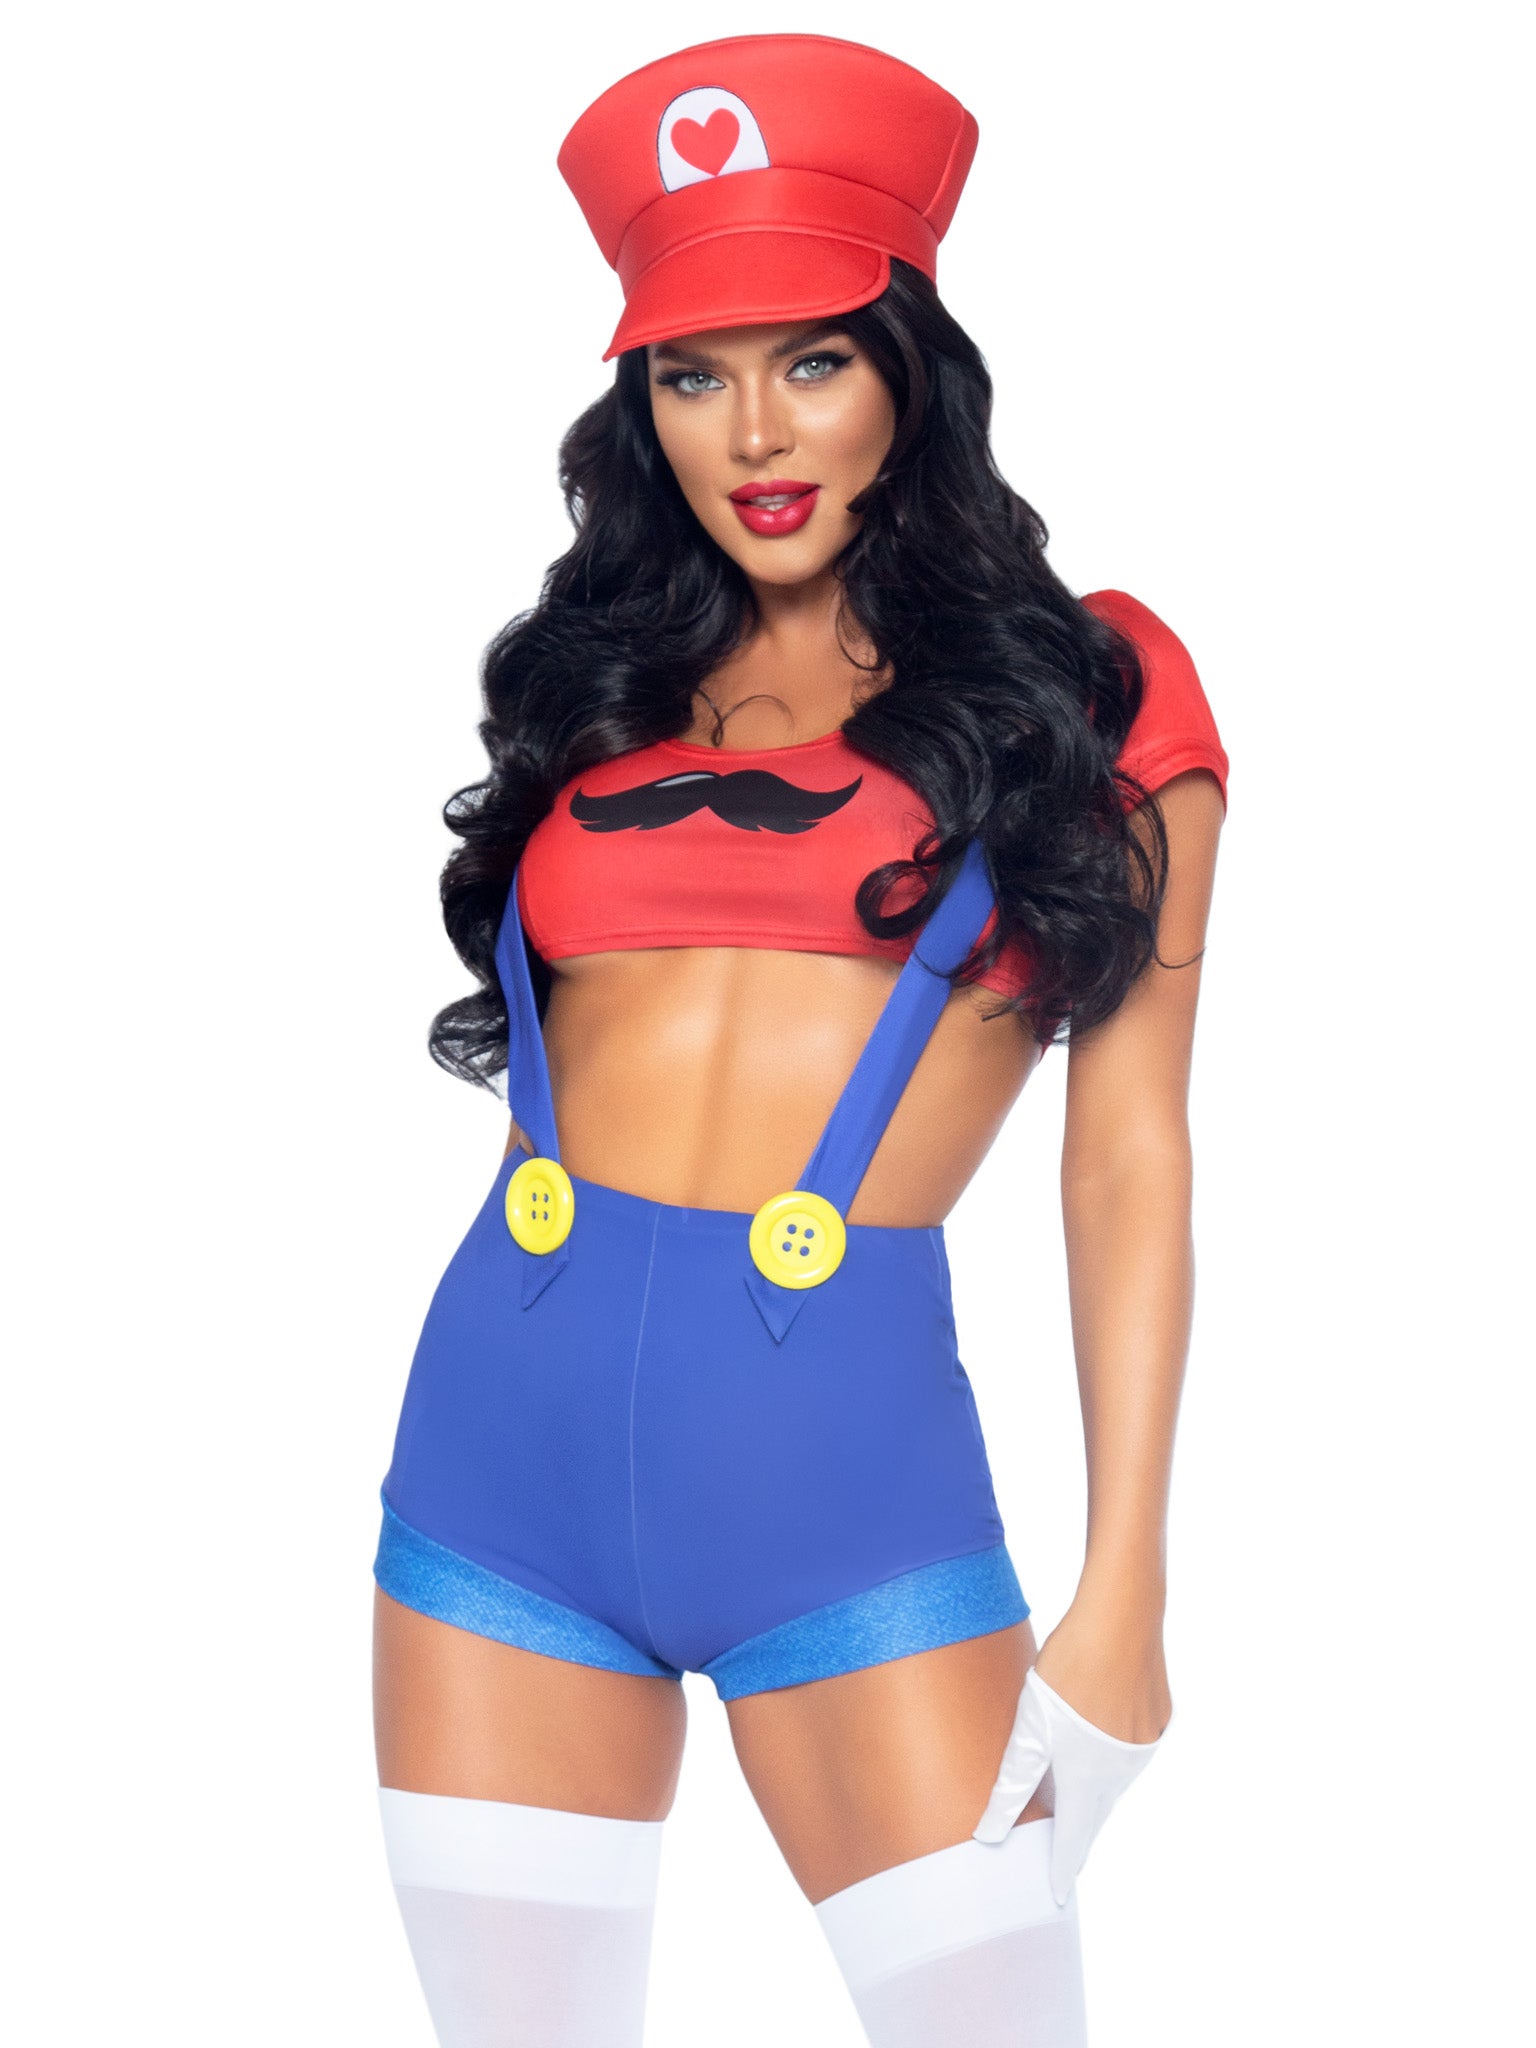 Gamer Babe Sexy Costume, Womens Video Game Costumes Leg Avenue picture